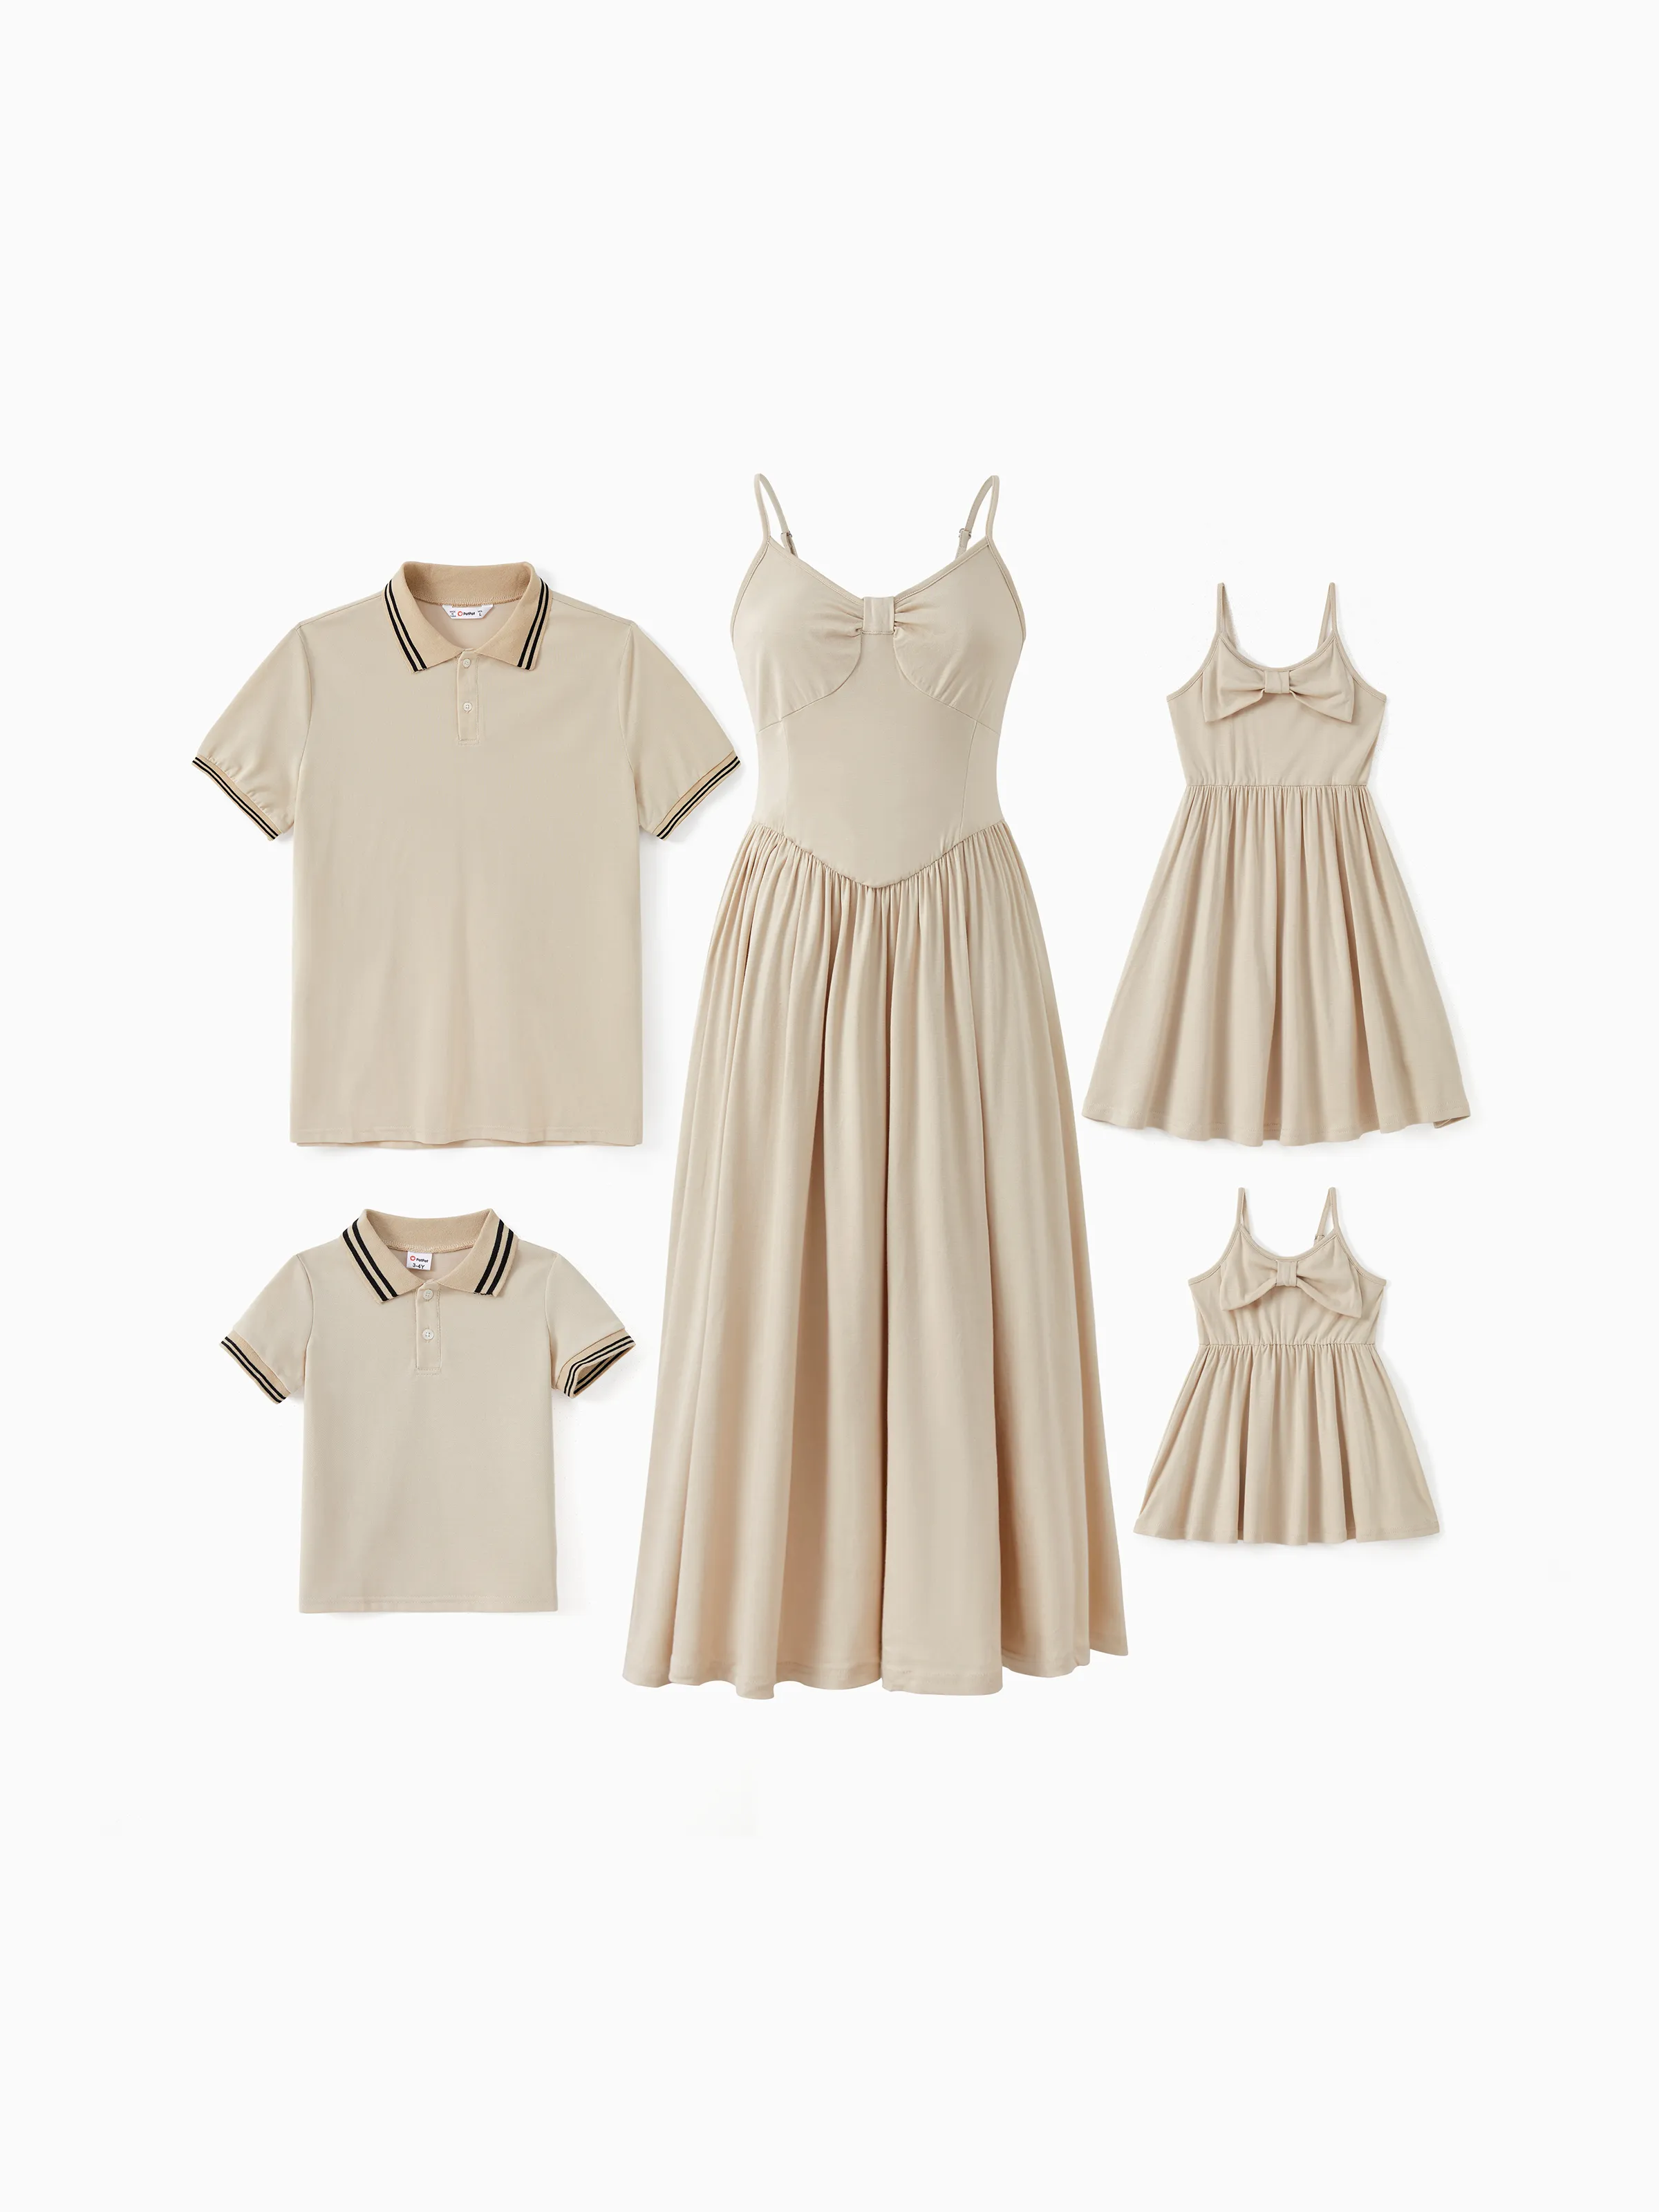 

Family Matching Light Apricot Polo Shirt or Bow Design Flowy A-Line Strap Dress Sets